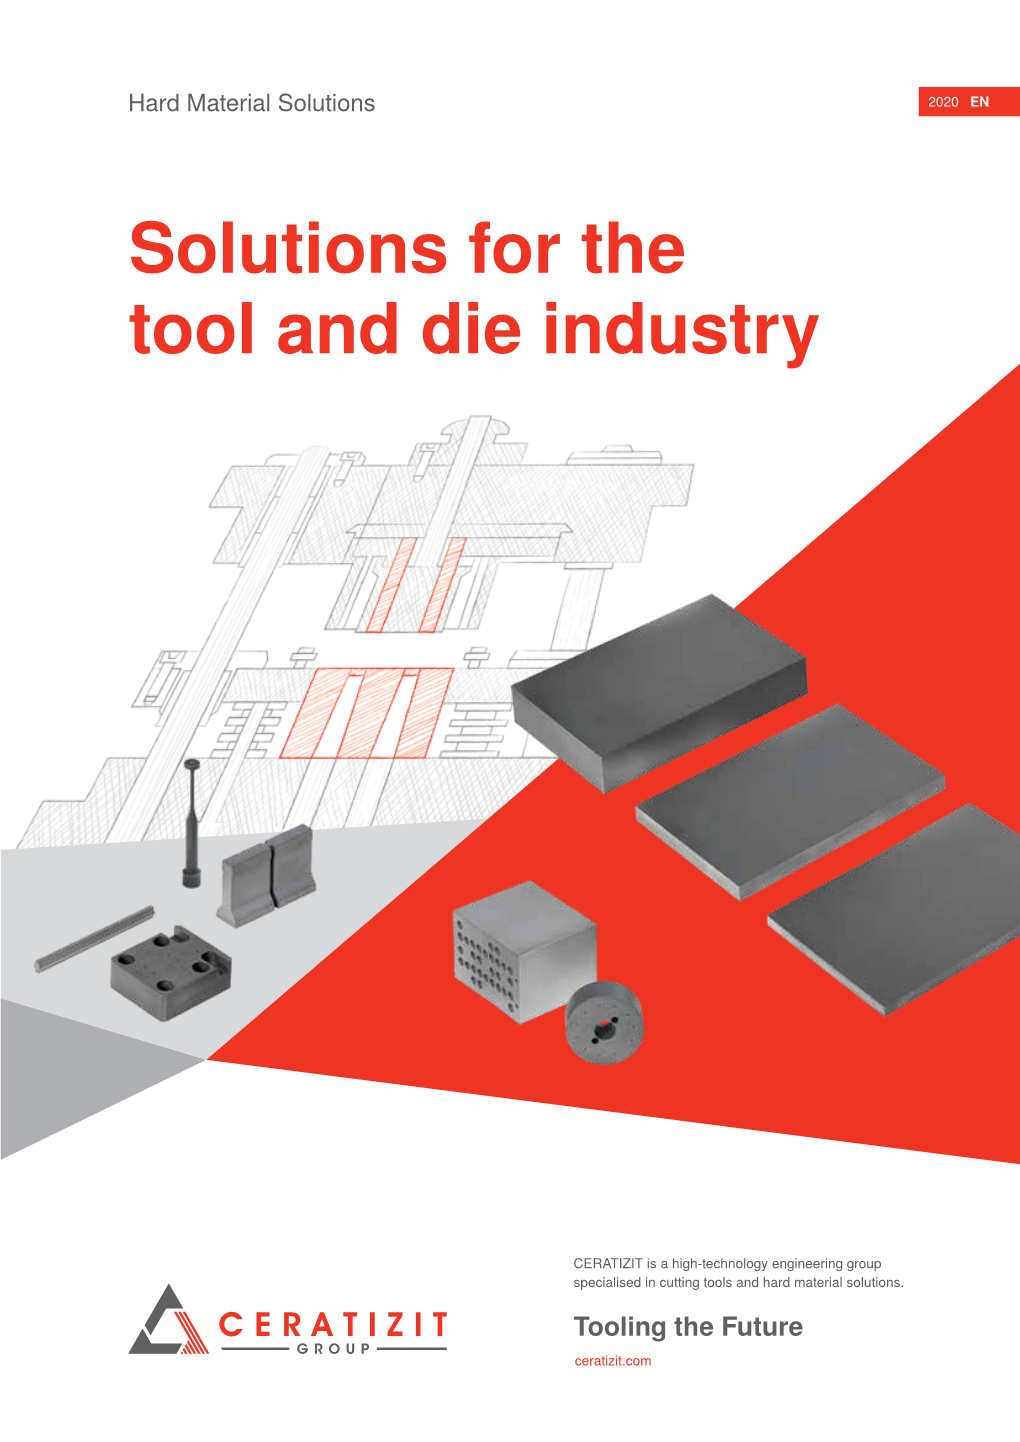 Solutions for the Tool and Die Industry